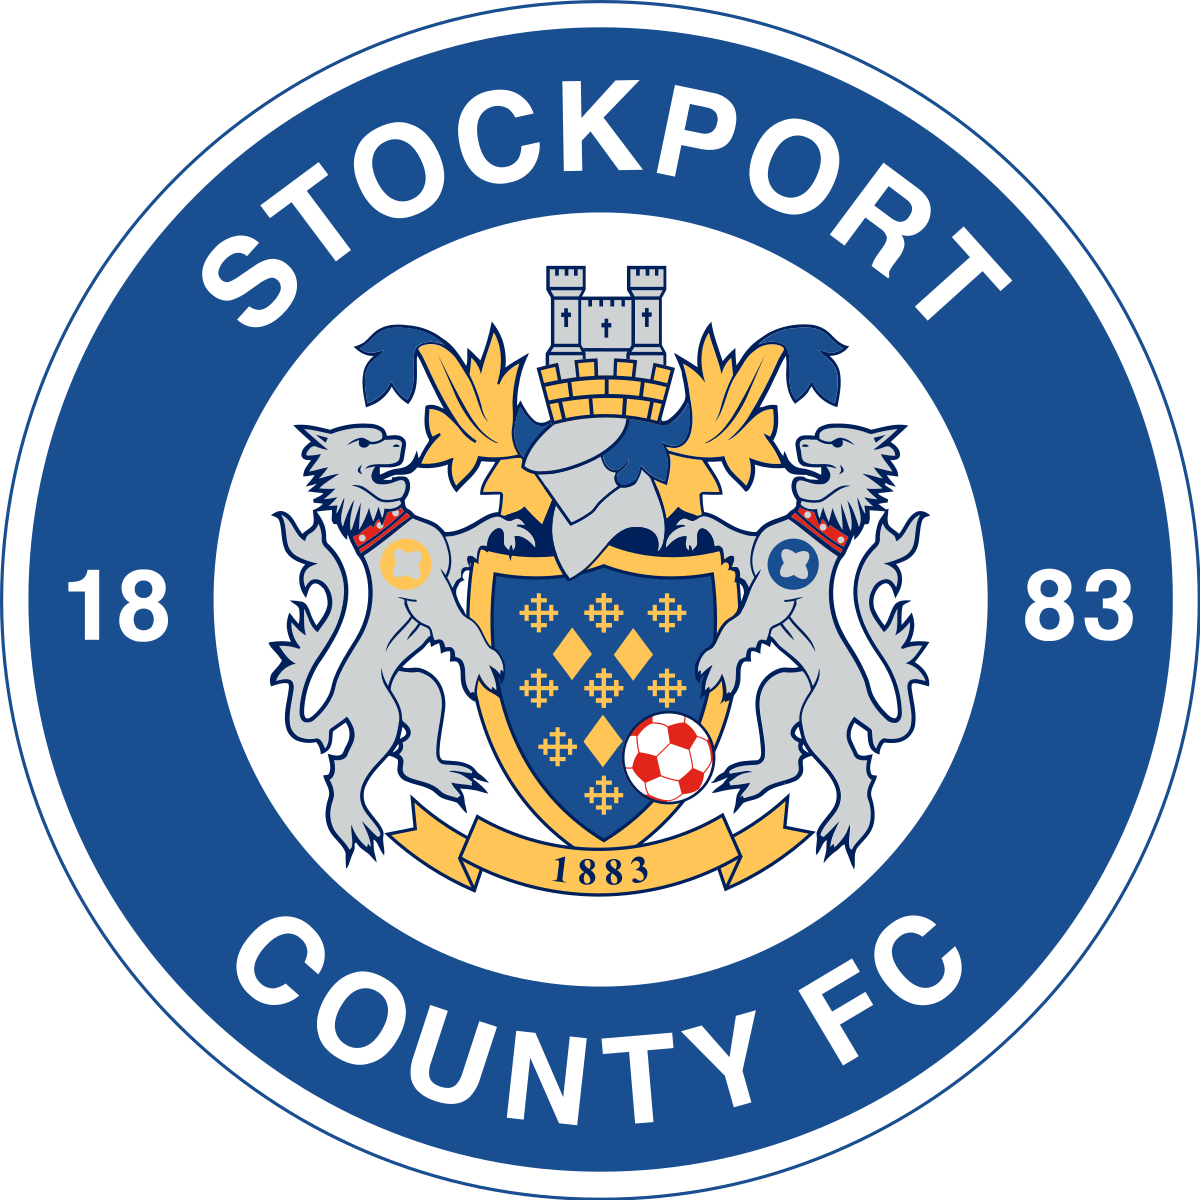 Stockport_County_FC_logo_2020.svg.png